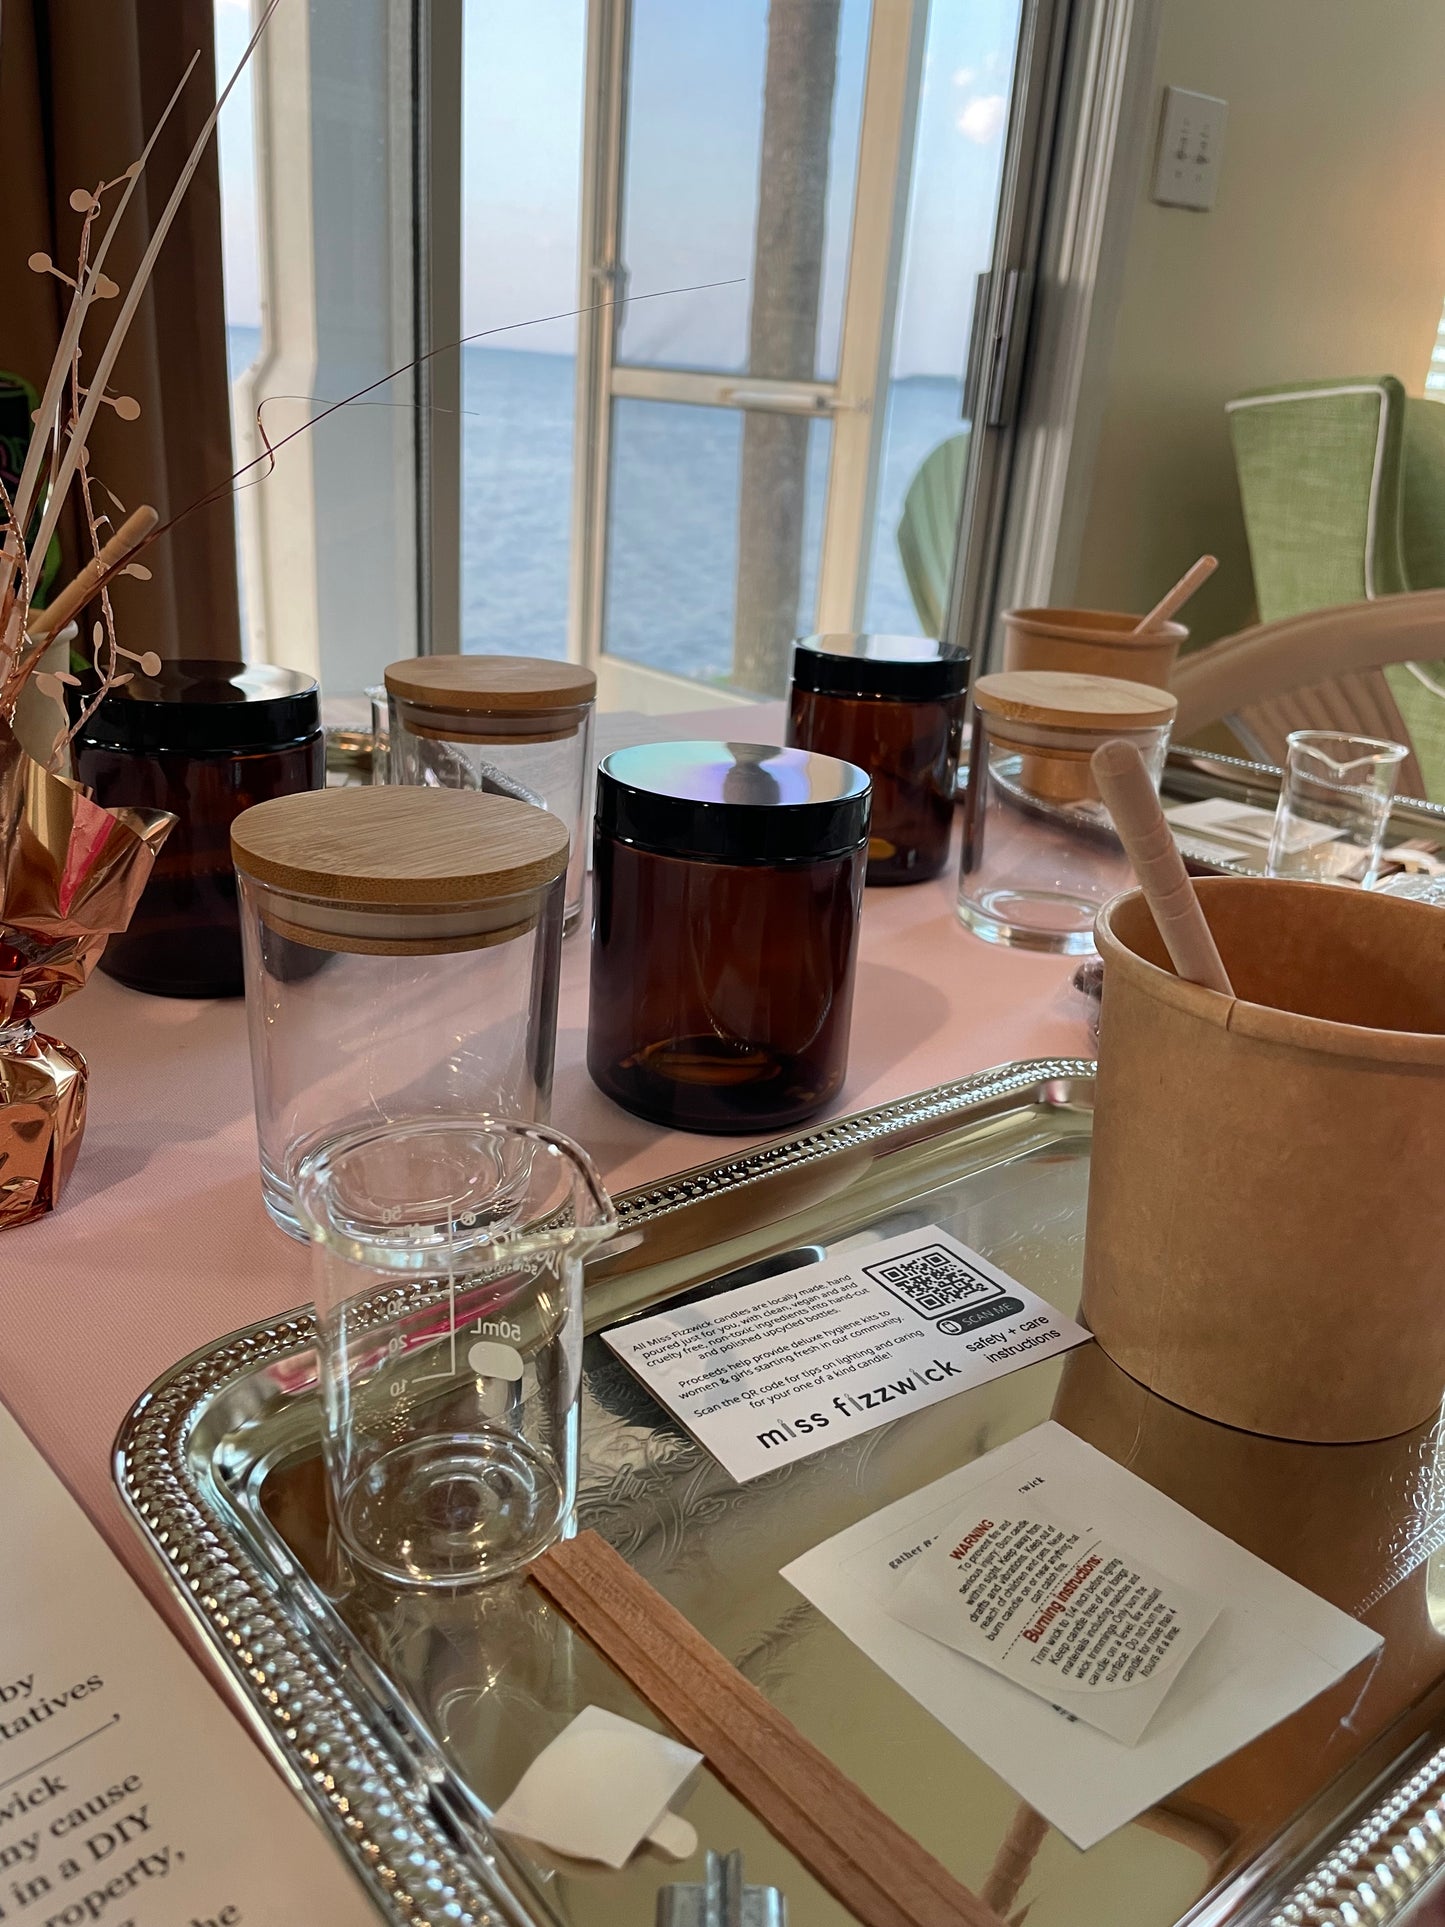 30a and Destin area Clean Luxury Candle Making Workshop in your Florida Home, Office or Vacation Rental